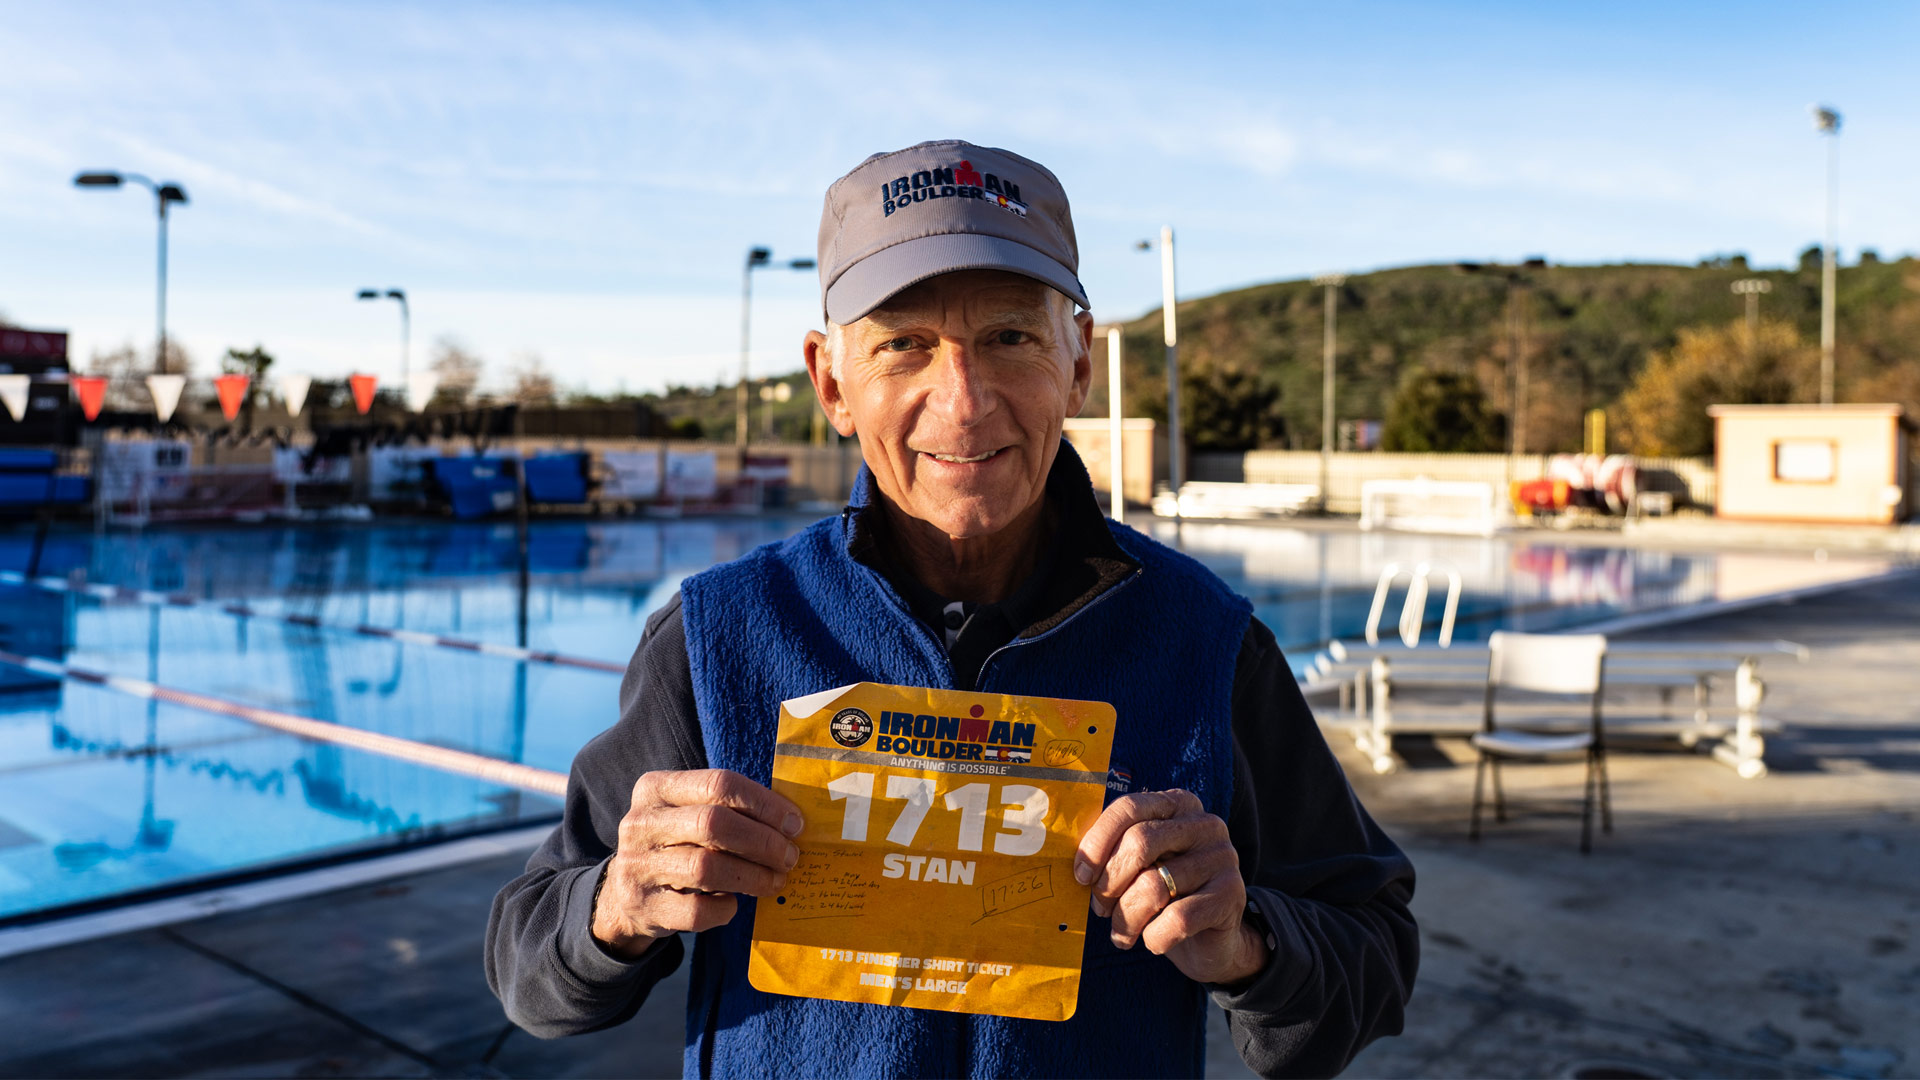 78-year-old Triathlete proves age is just a number